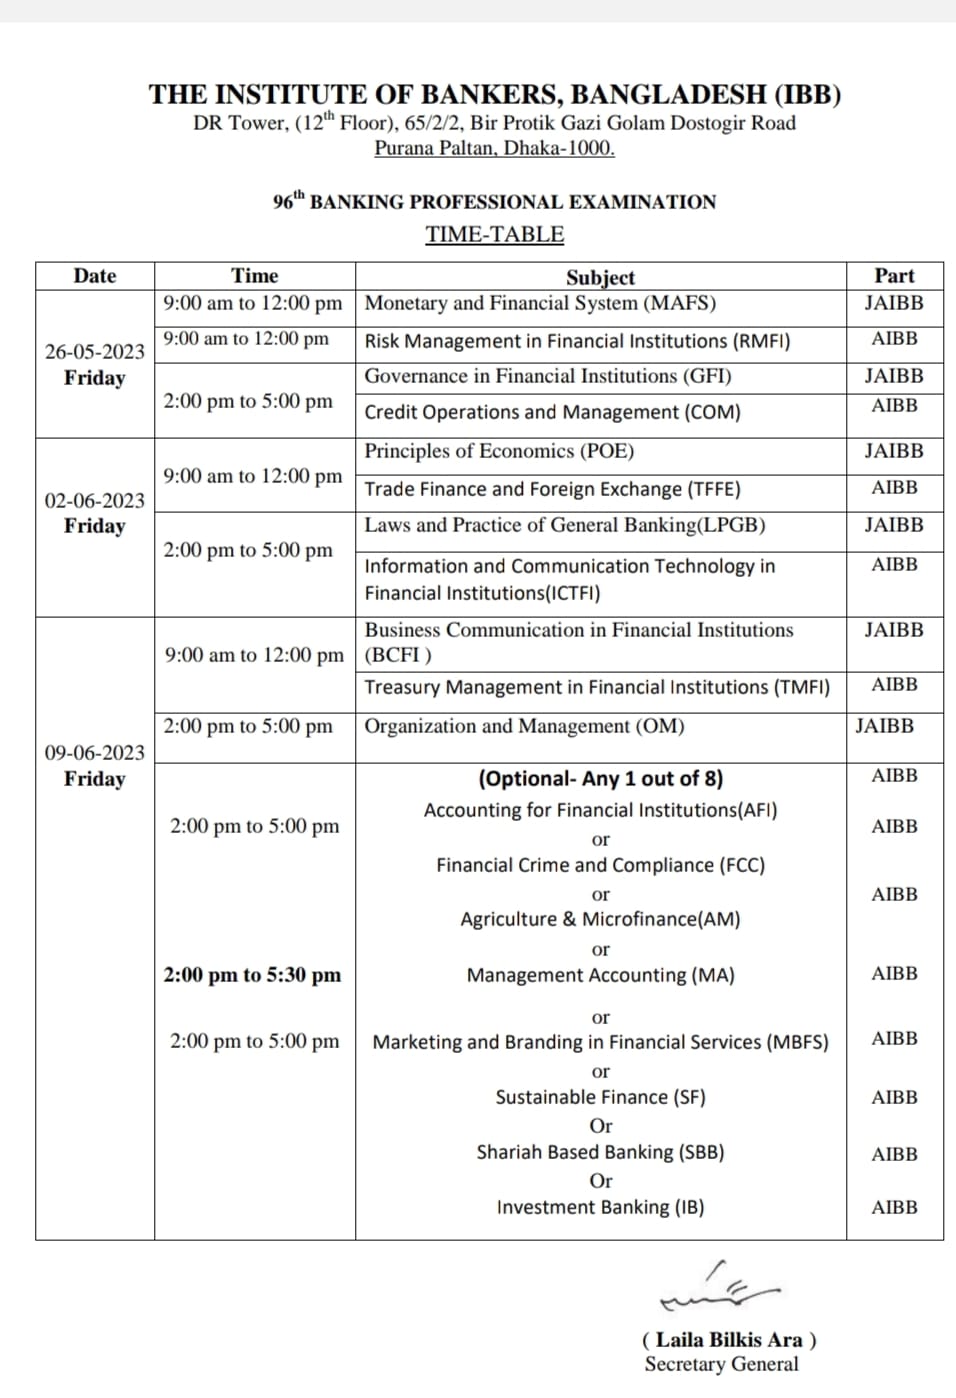 96th Banking Professional Exam Routine 2023